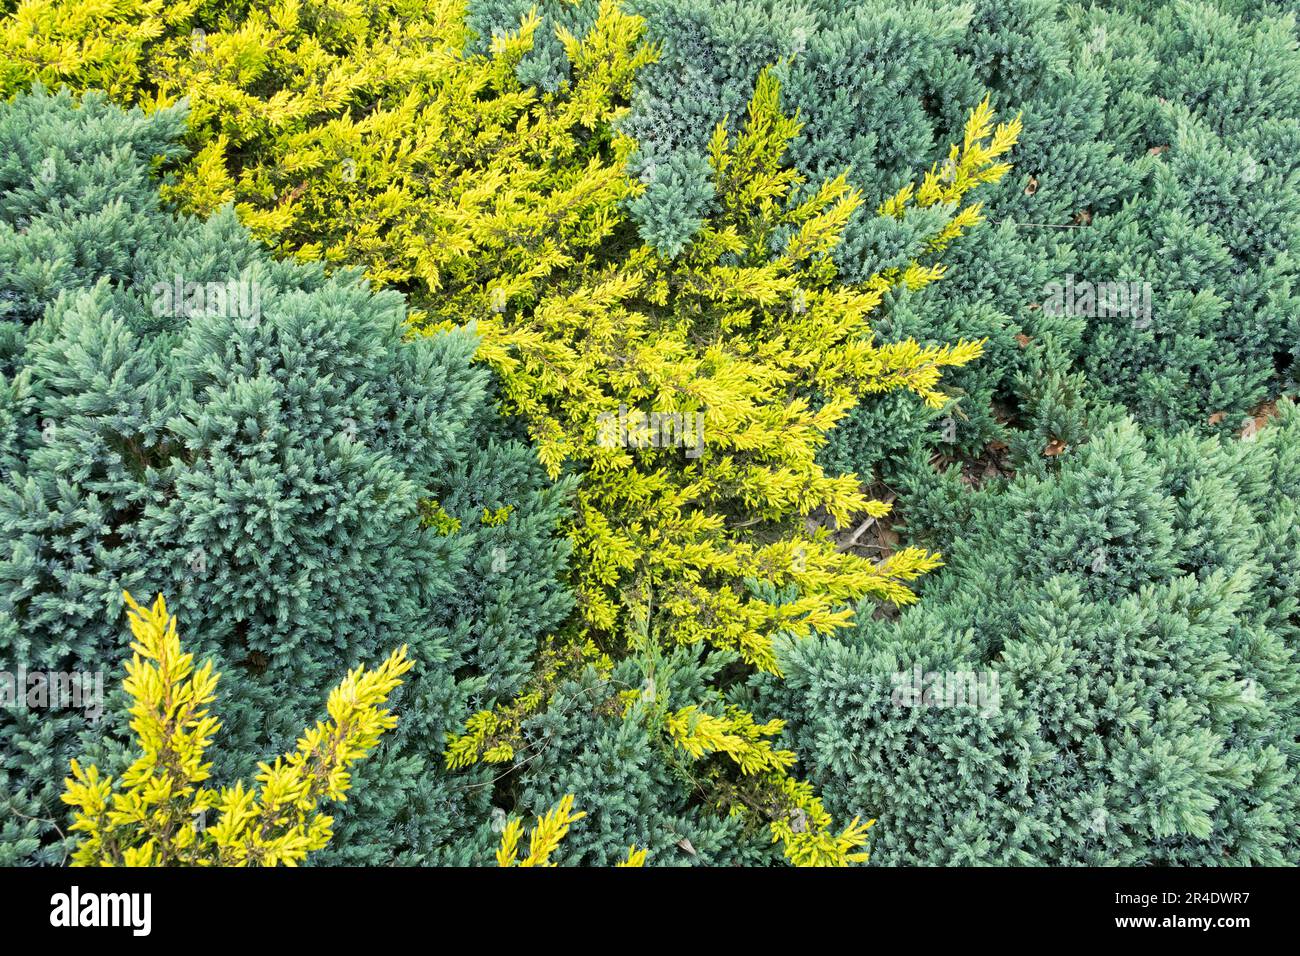 Yellow Blue creepers ground cover plants Stock Photo